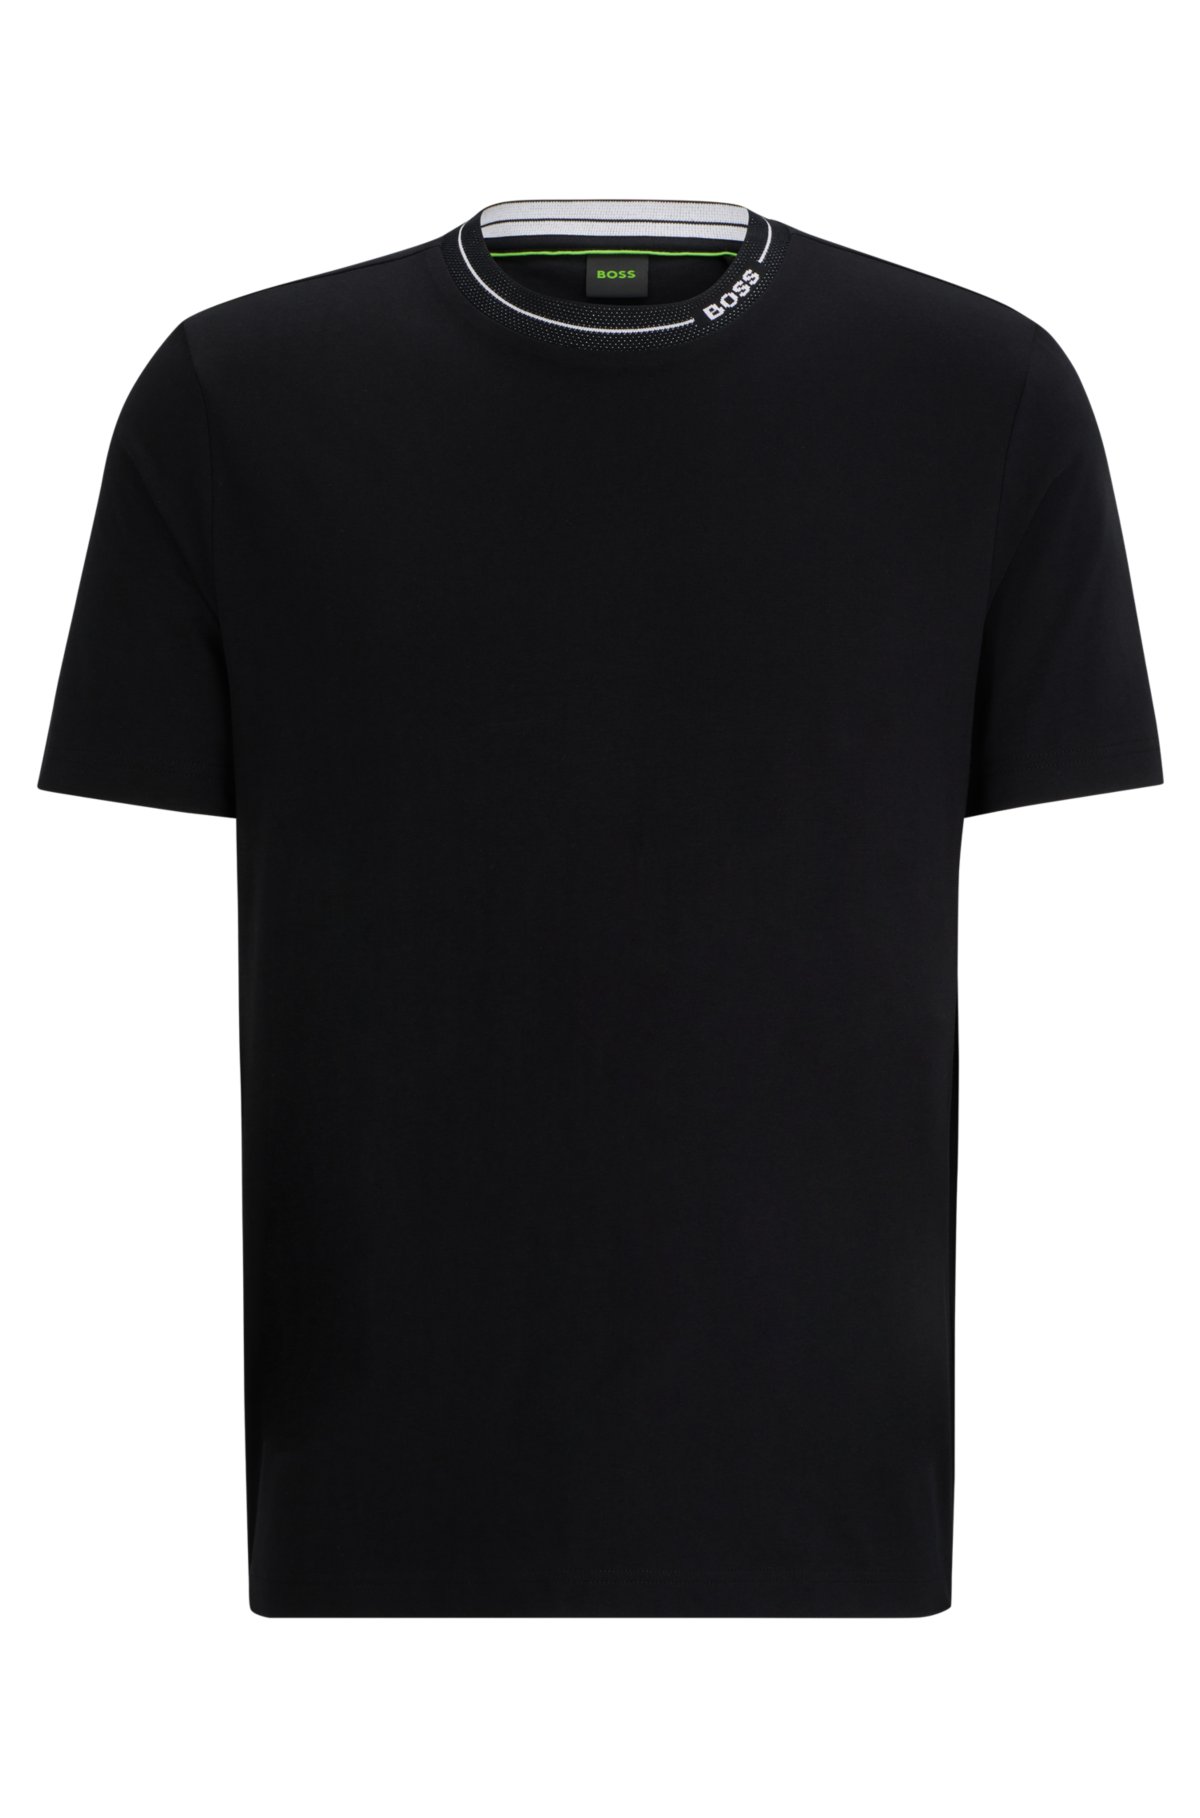 Cotton-jersey regular-fit T-shirt with branded collar, Black